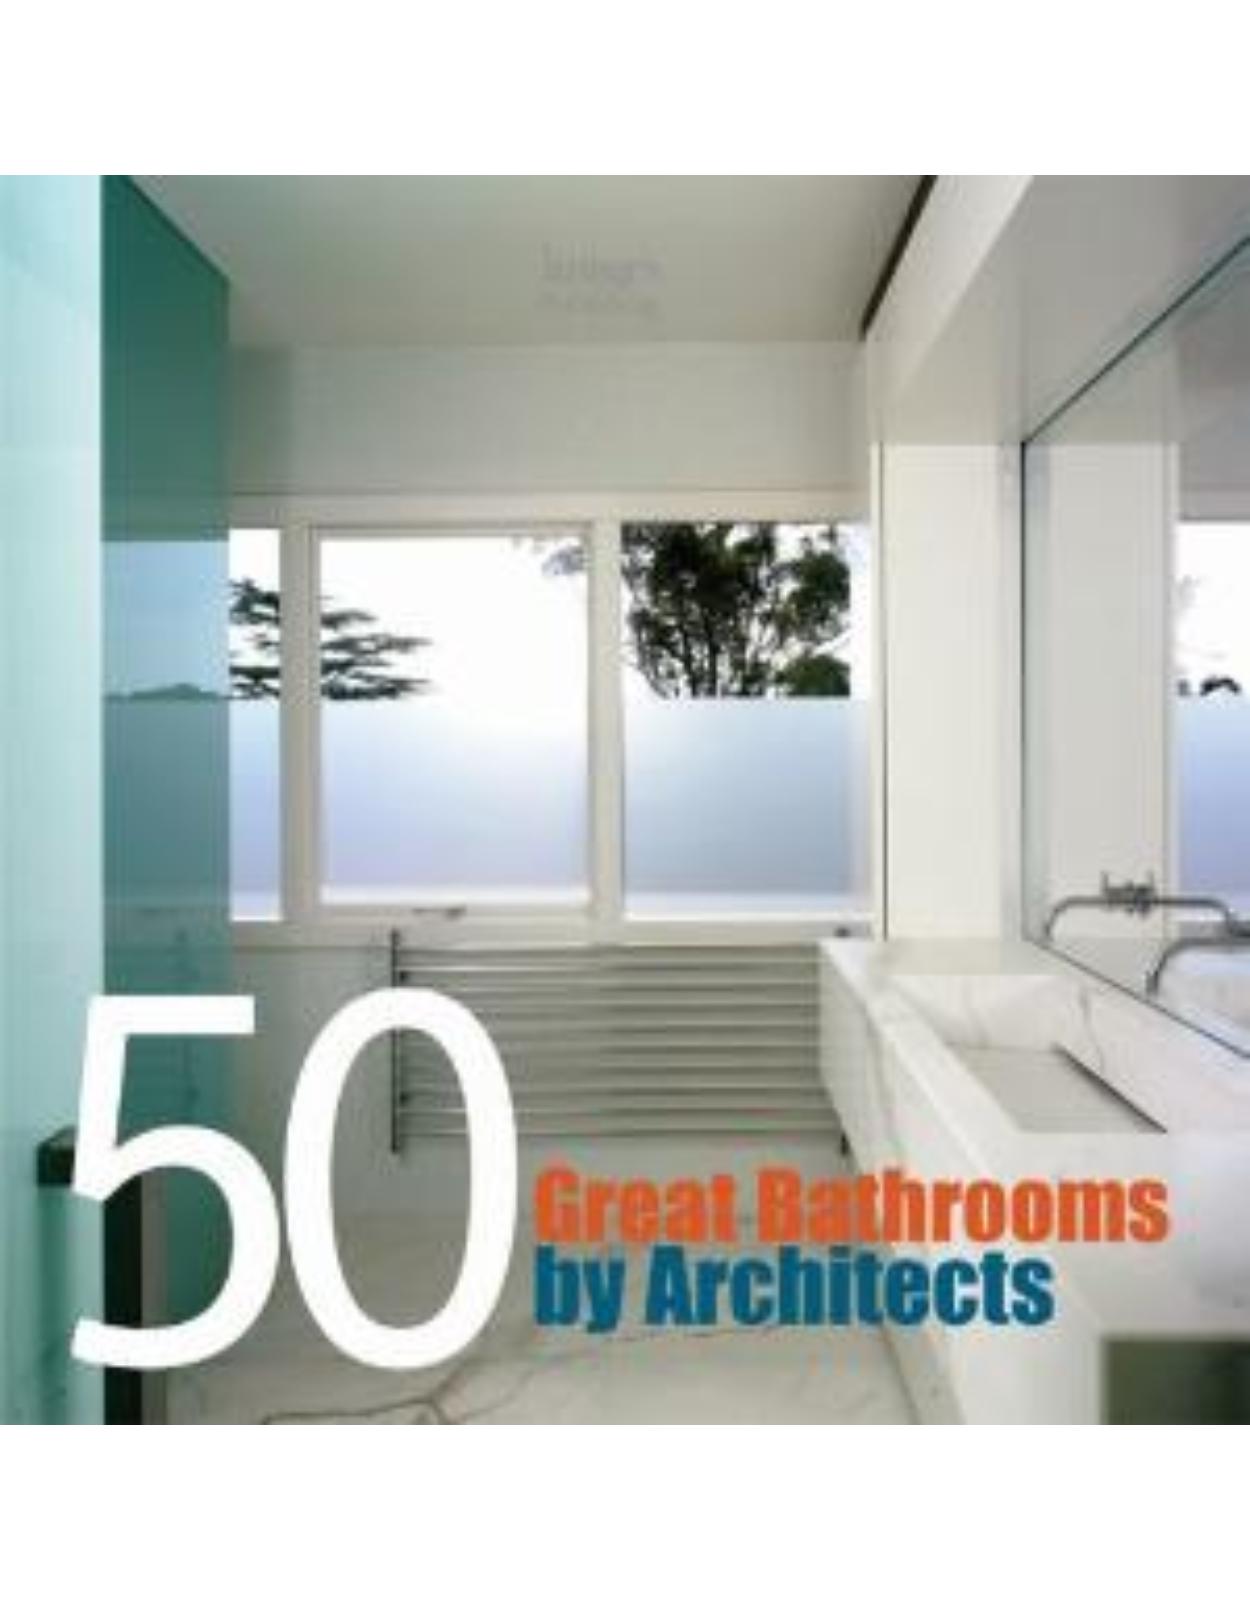 50 Great Bathrooms by Architects